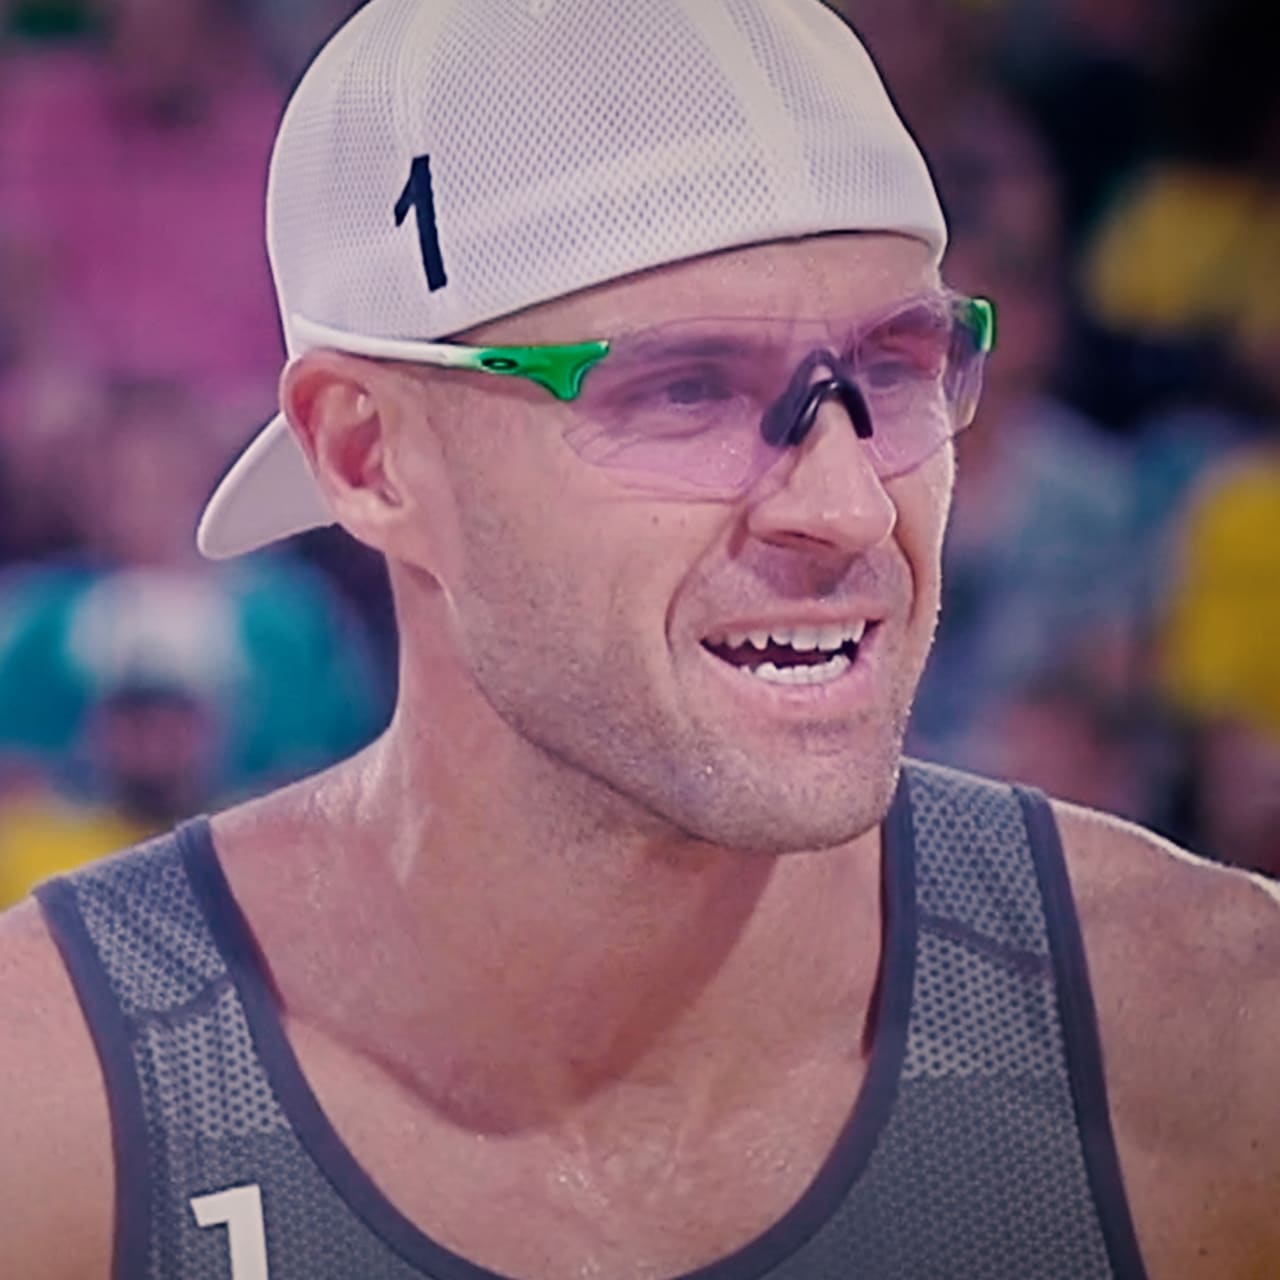 Jake Gibb on becoming the oldest Olympian in beach volleyball